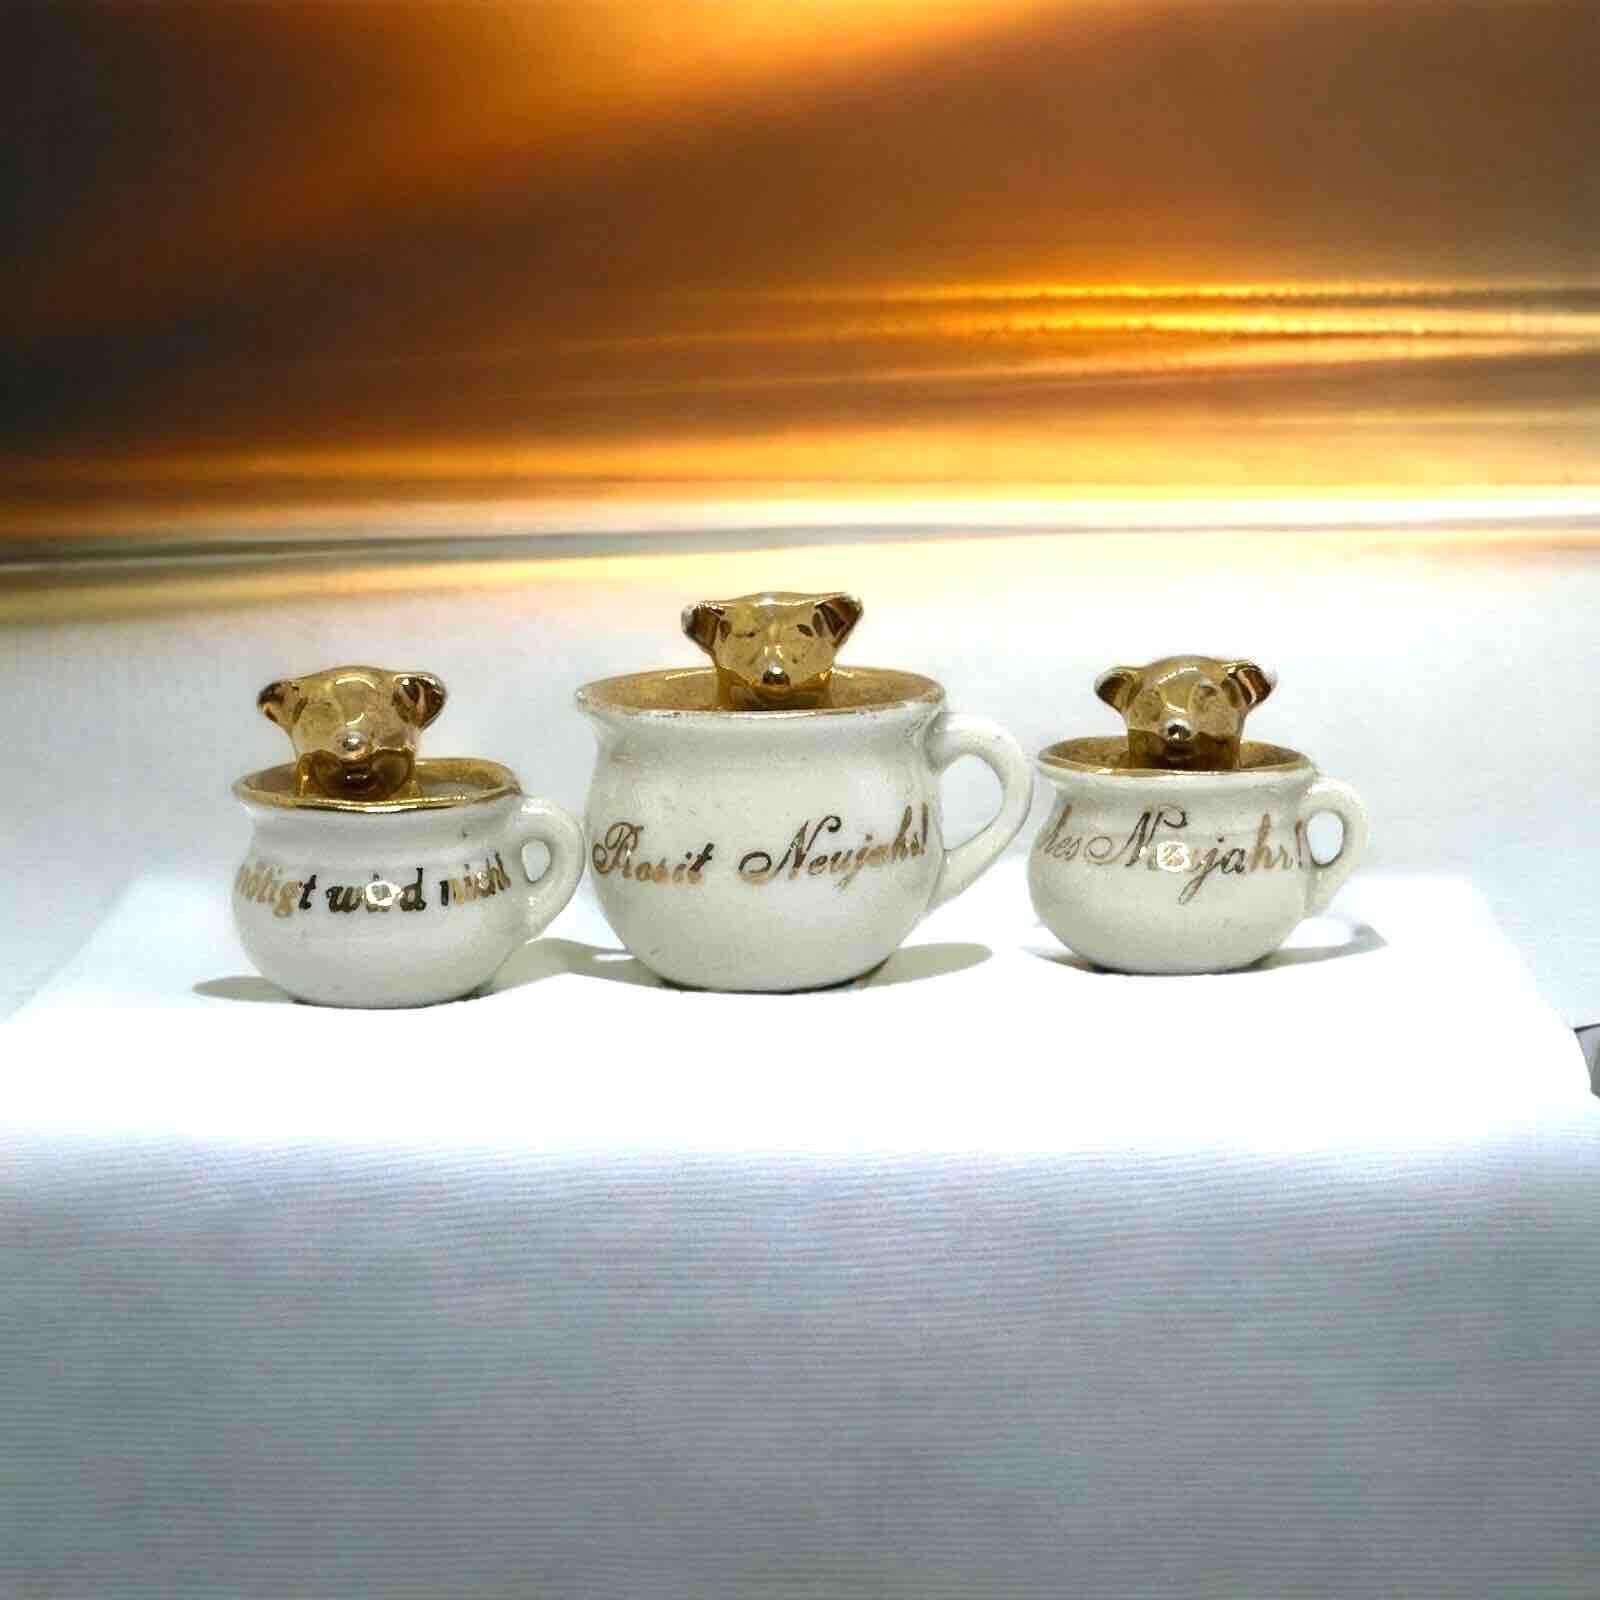 A beautiful collection of golden pig lucky charm figurines. Made from china porcelain. Such items are given away as good luck charms on New Year's Eve. Nice addition to your Christmas or New Year collection or decoration. It dates from the 1900s or